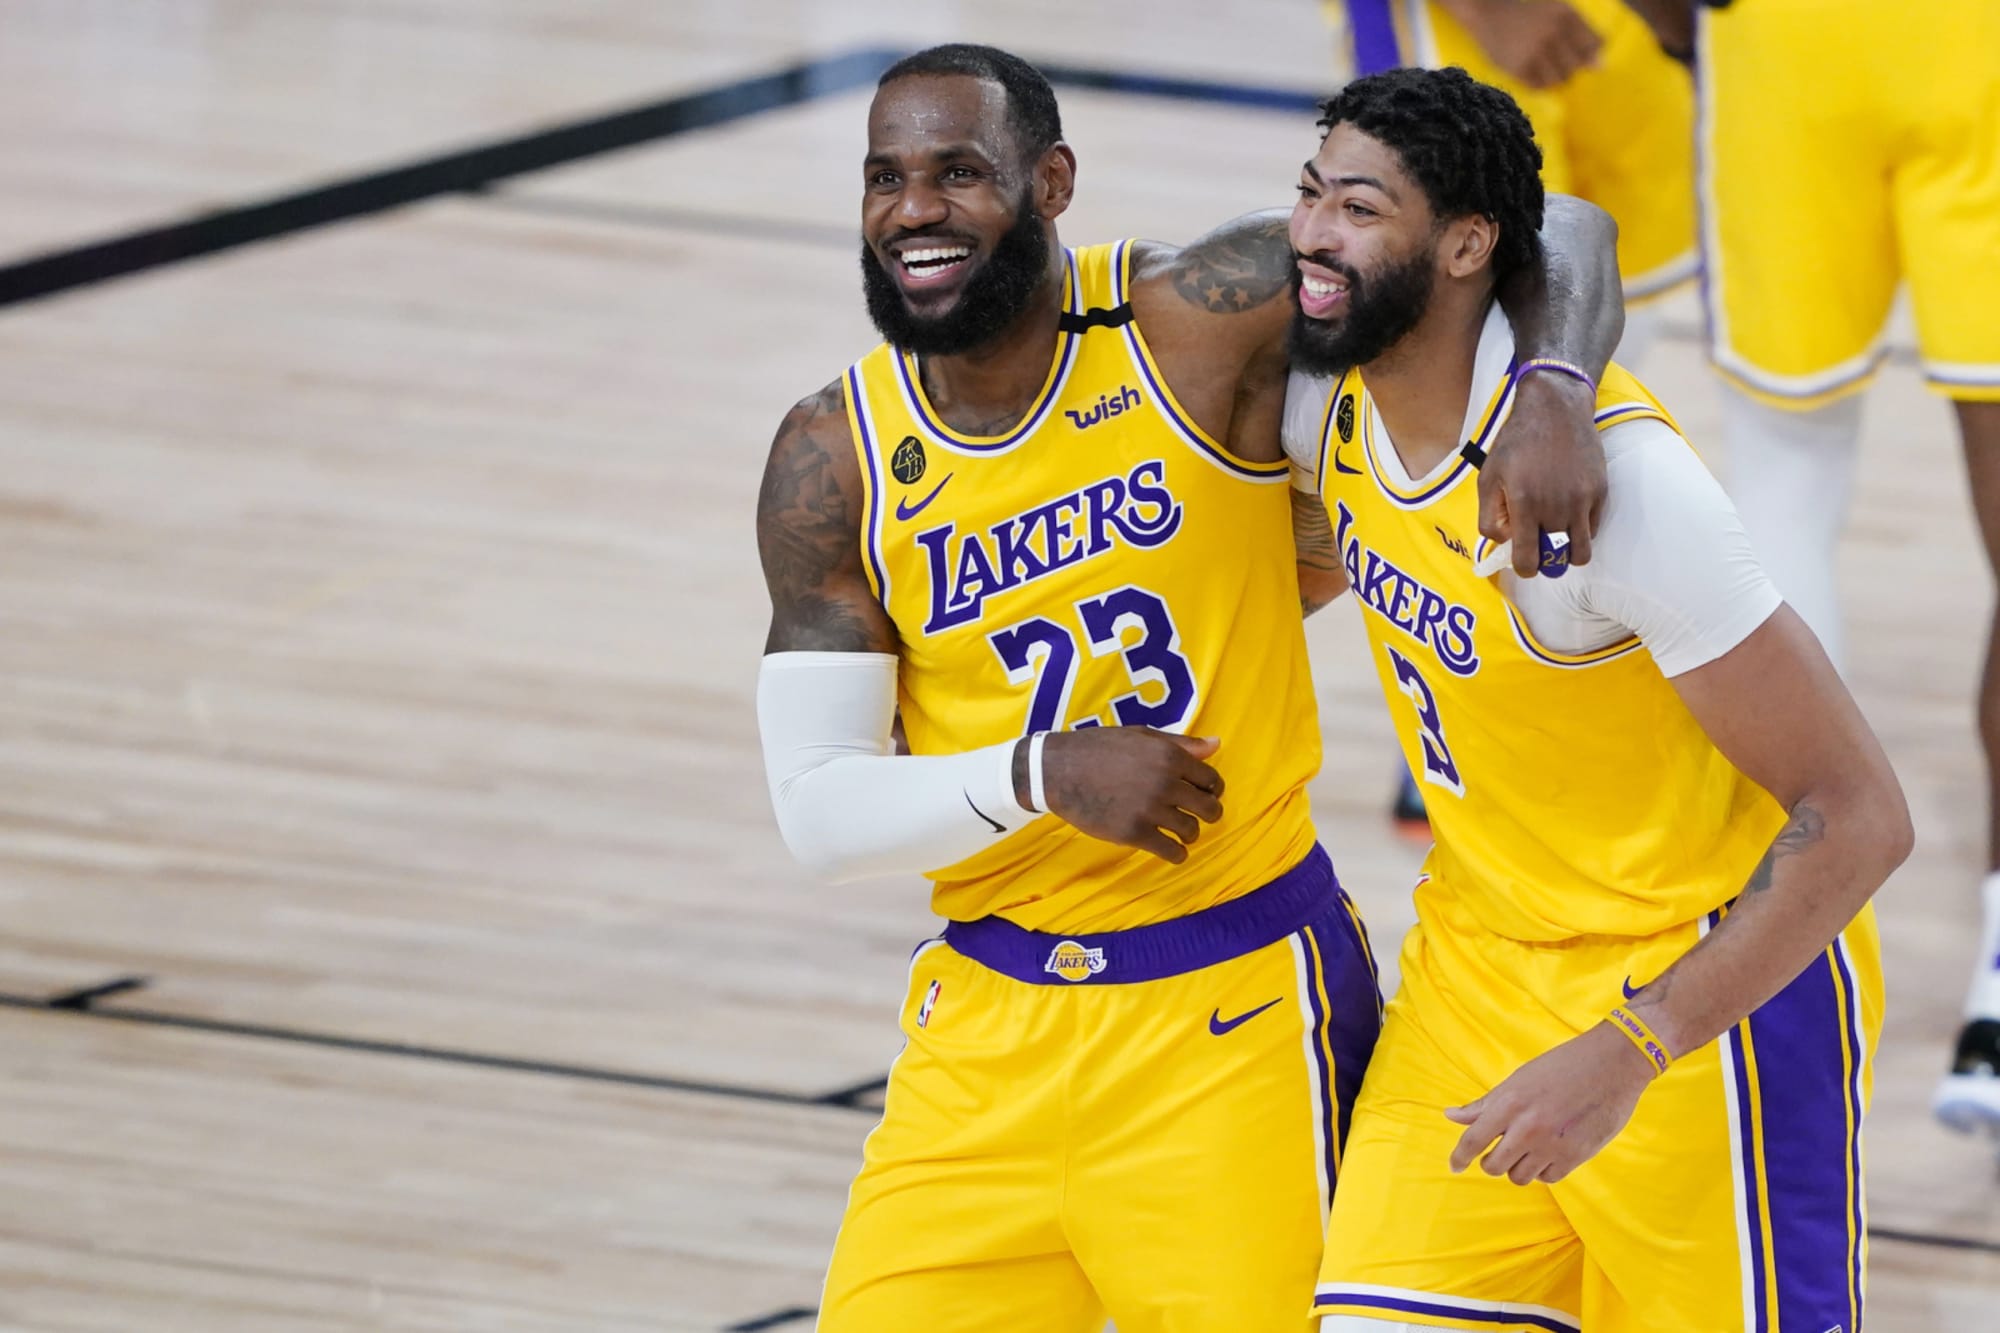 Nba Playoffs Bold Prediction For Each Series Including Blazers Vs Lakers